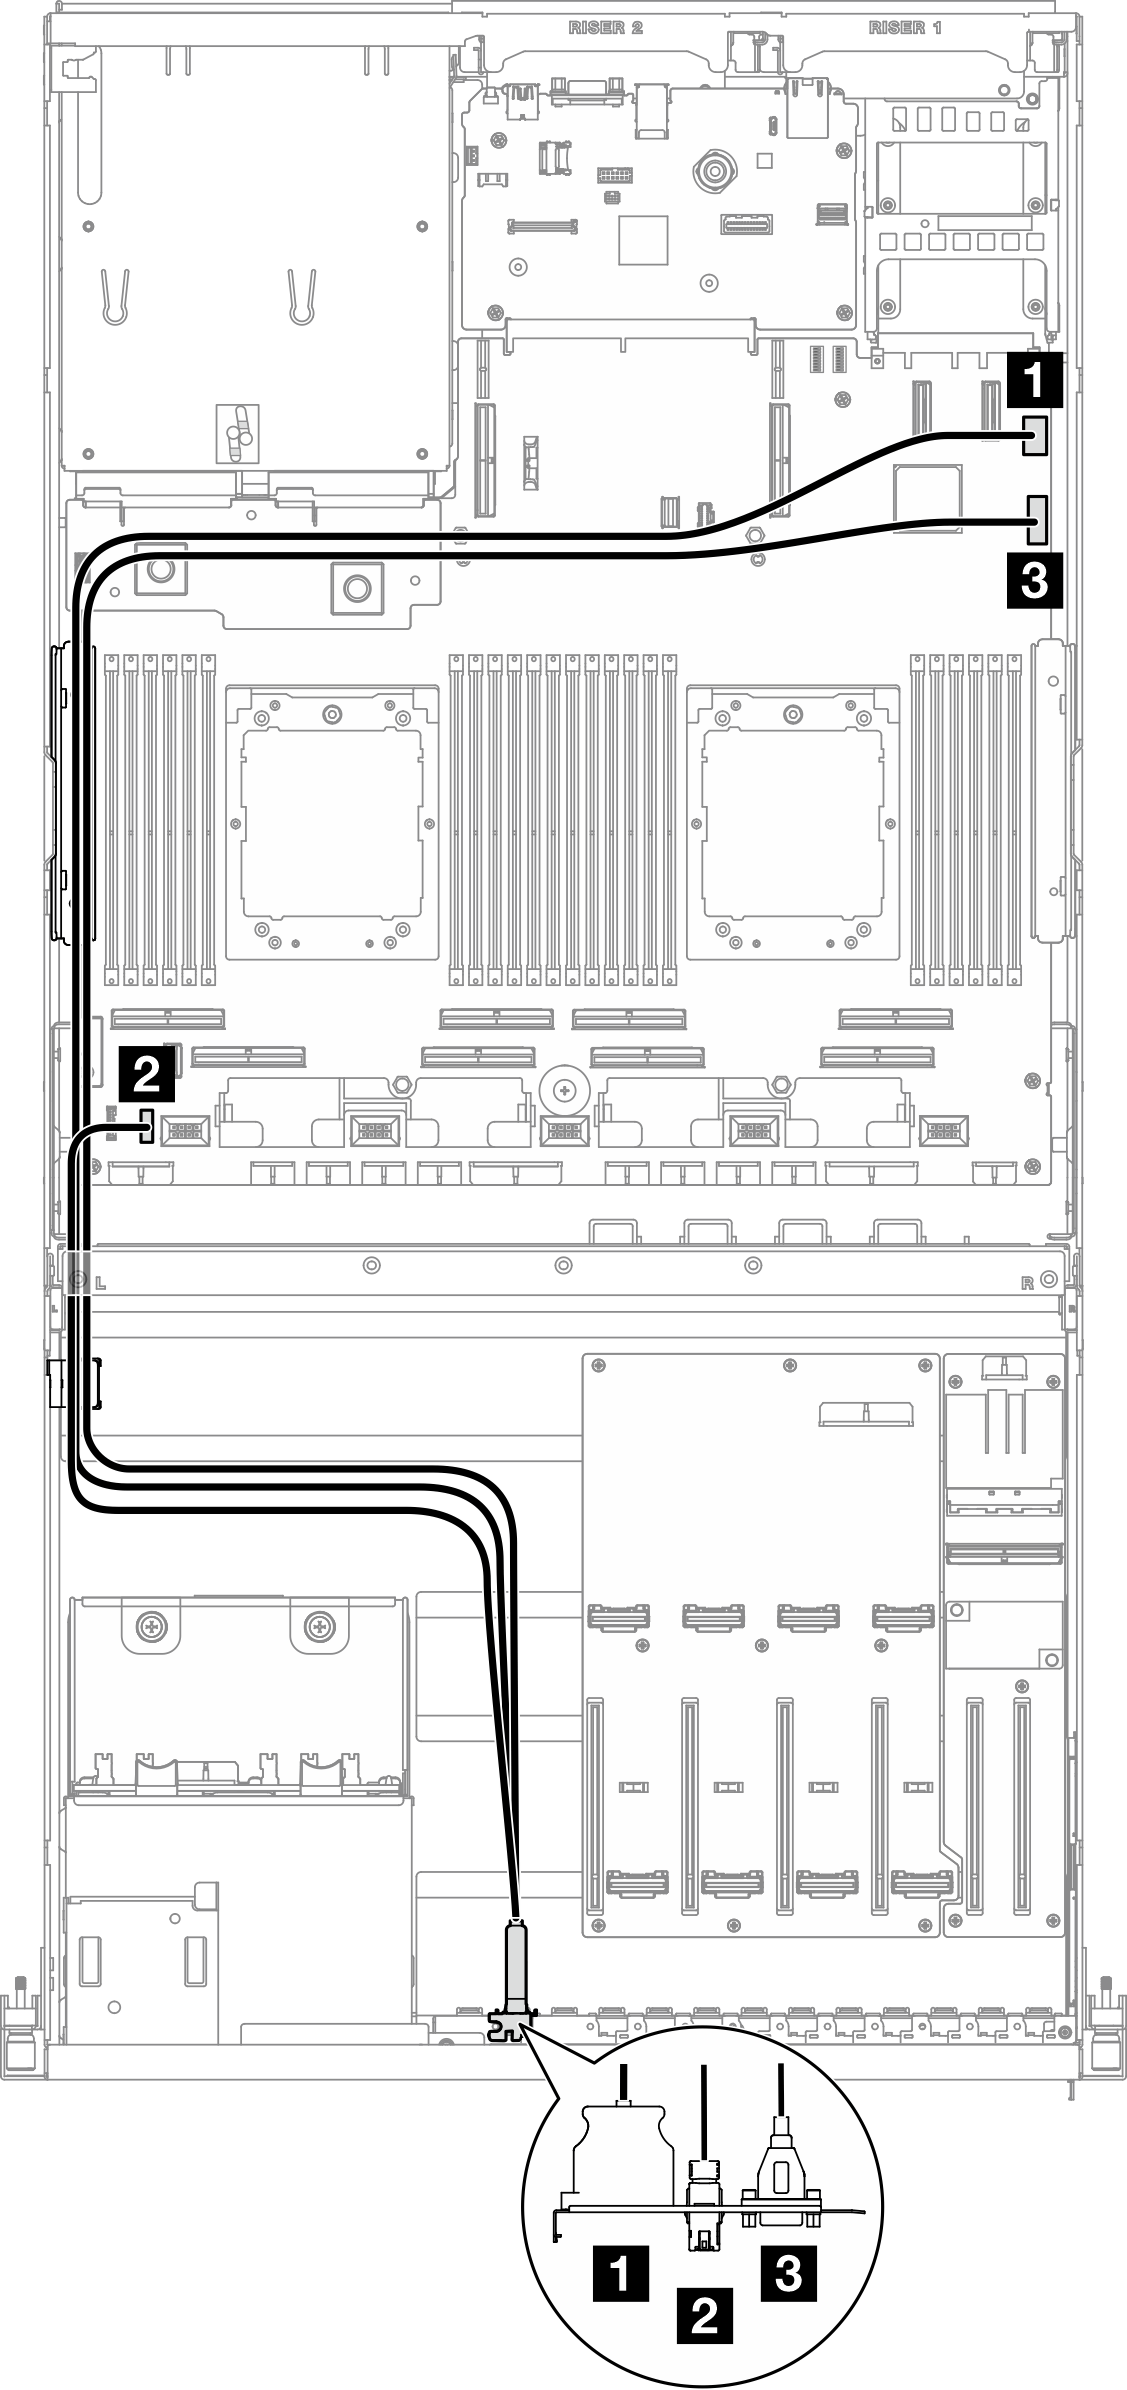 Cable routing for the front I/O module — 4-DW GPU モデル